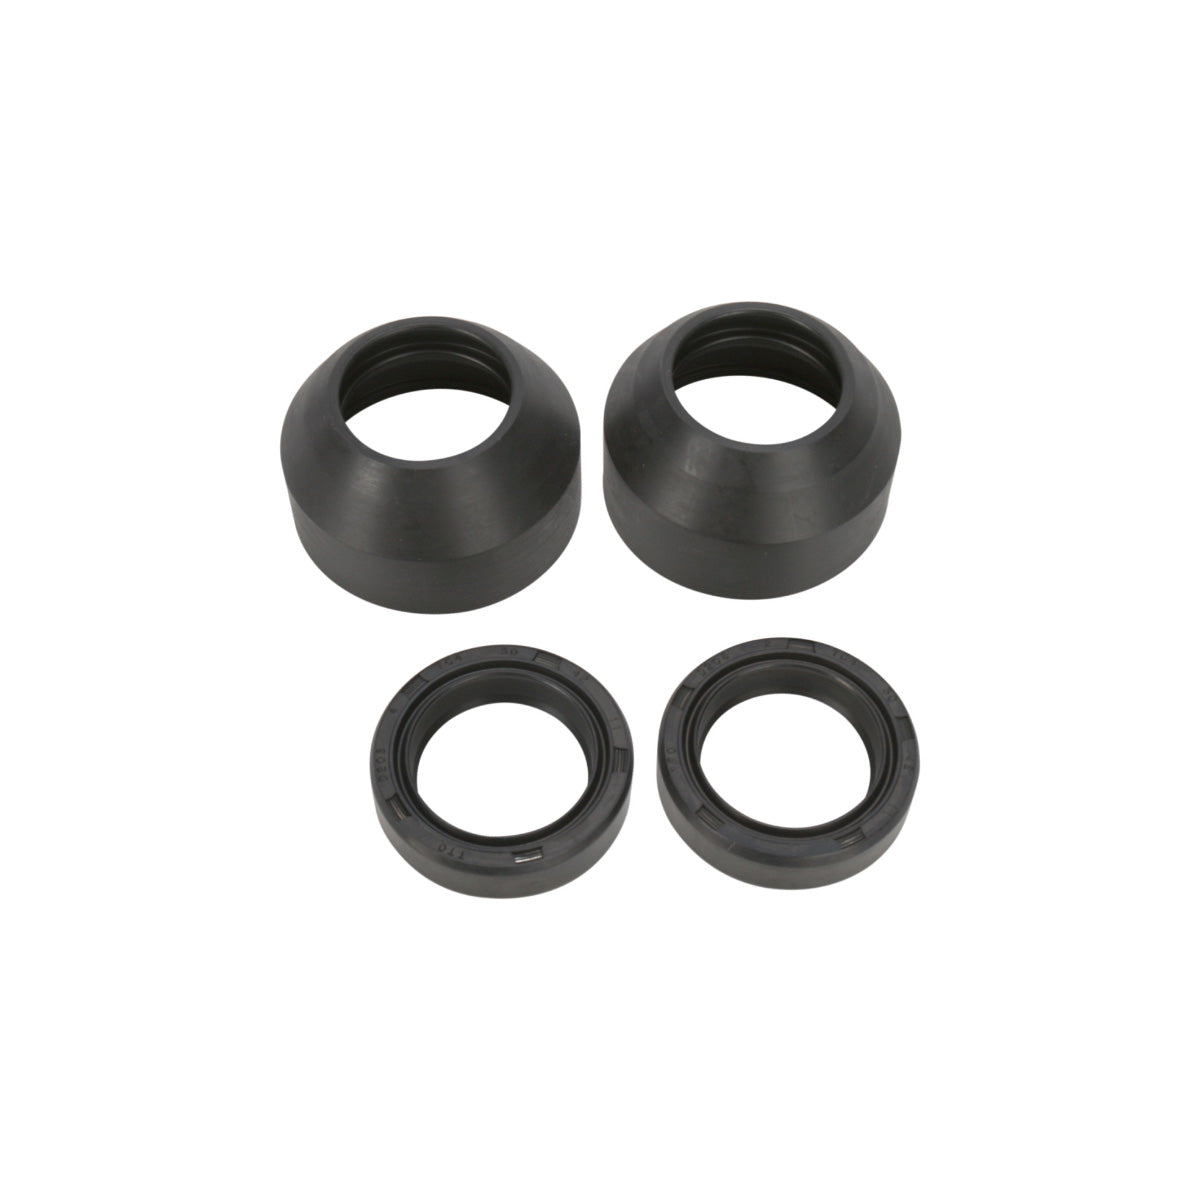 Moose Racing Fork and Dust Seal Kits